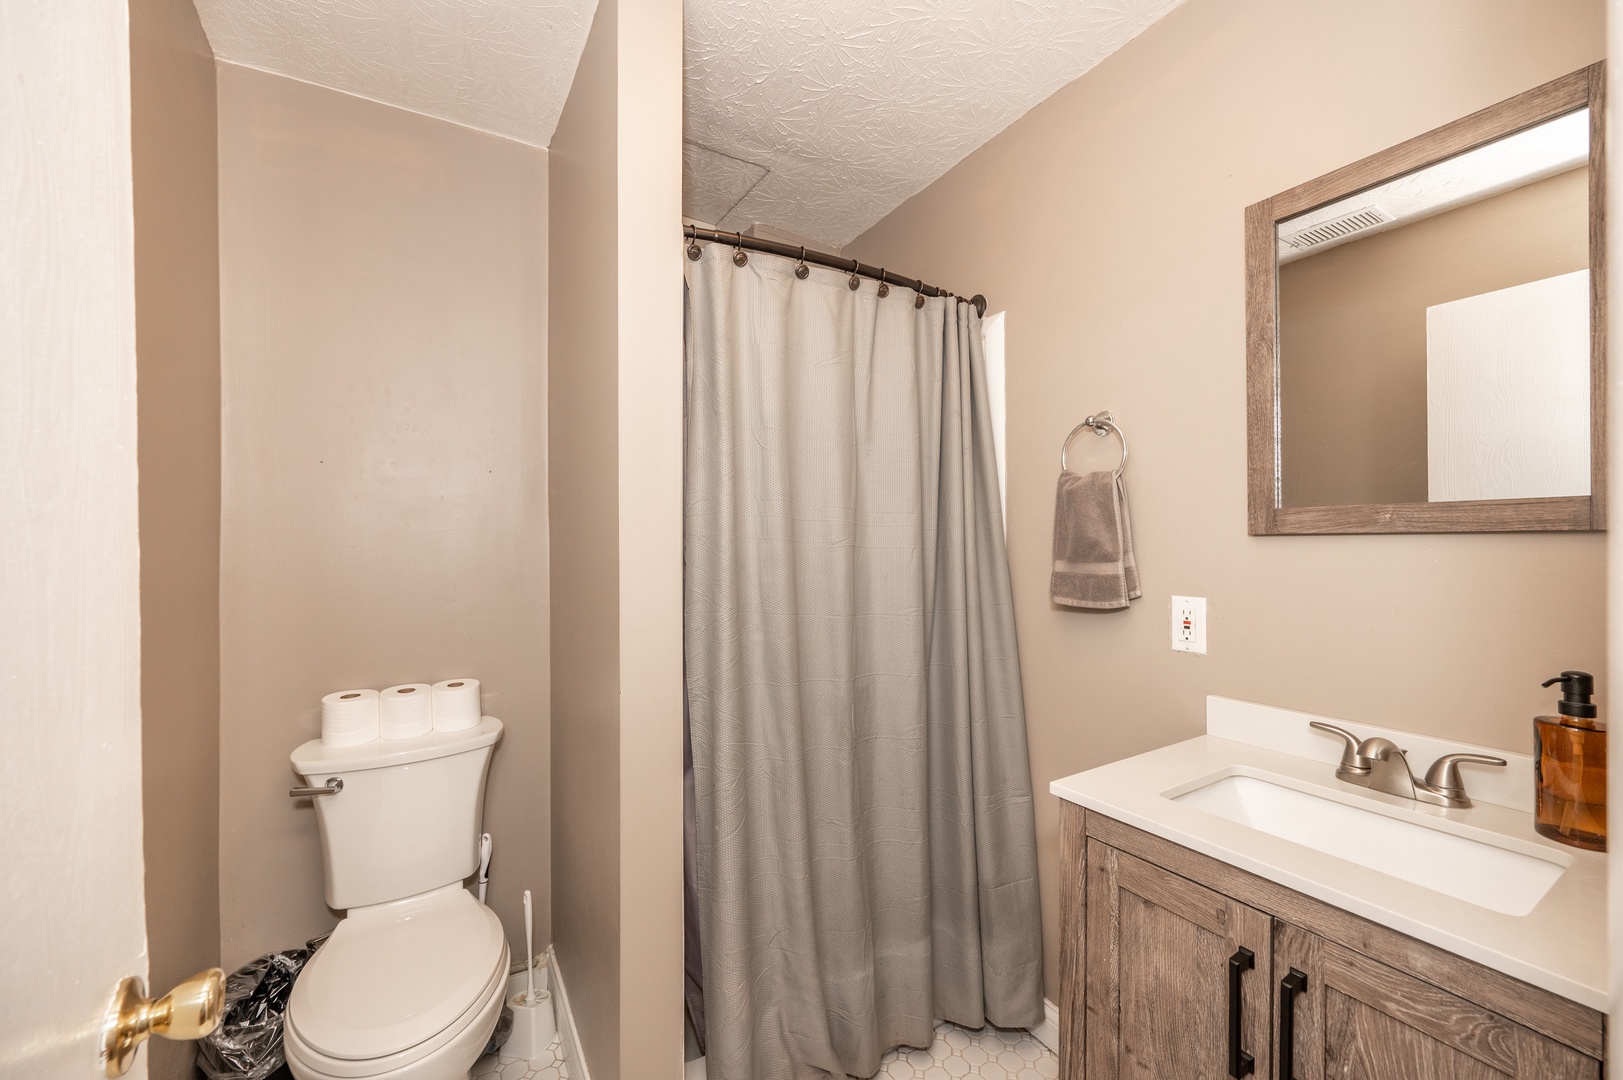 Monmouth Loft 1’s bathroom is nicely tucked away & offers a walk-in shower